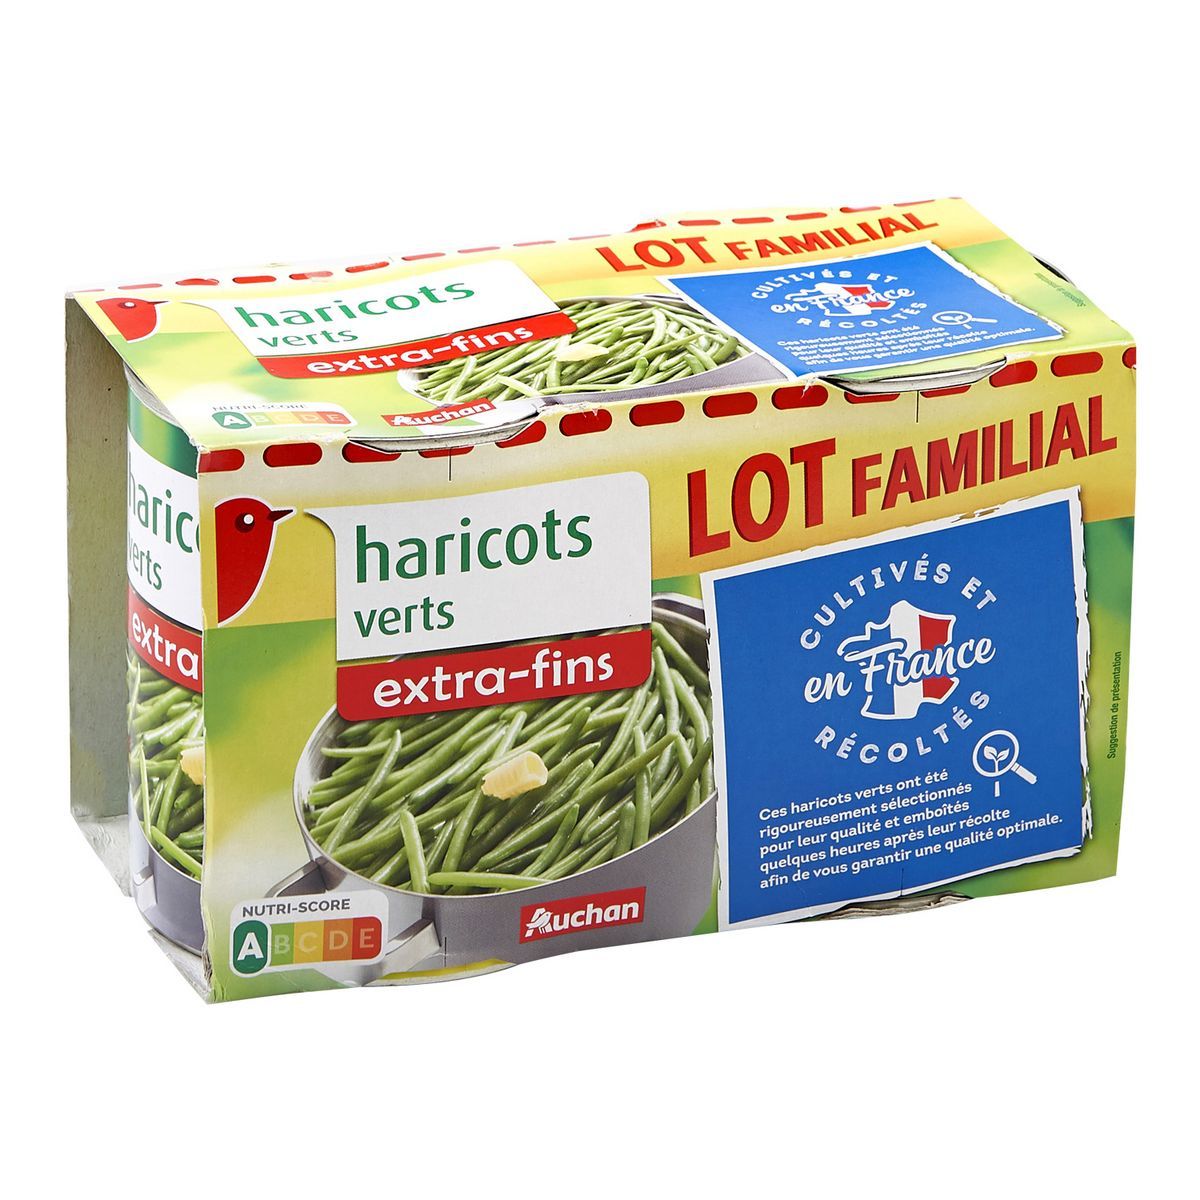 HARICOTS VERTS EXTRA FINS AUCHAN